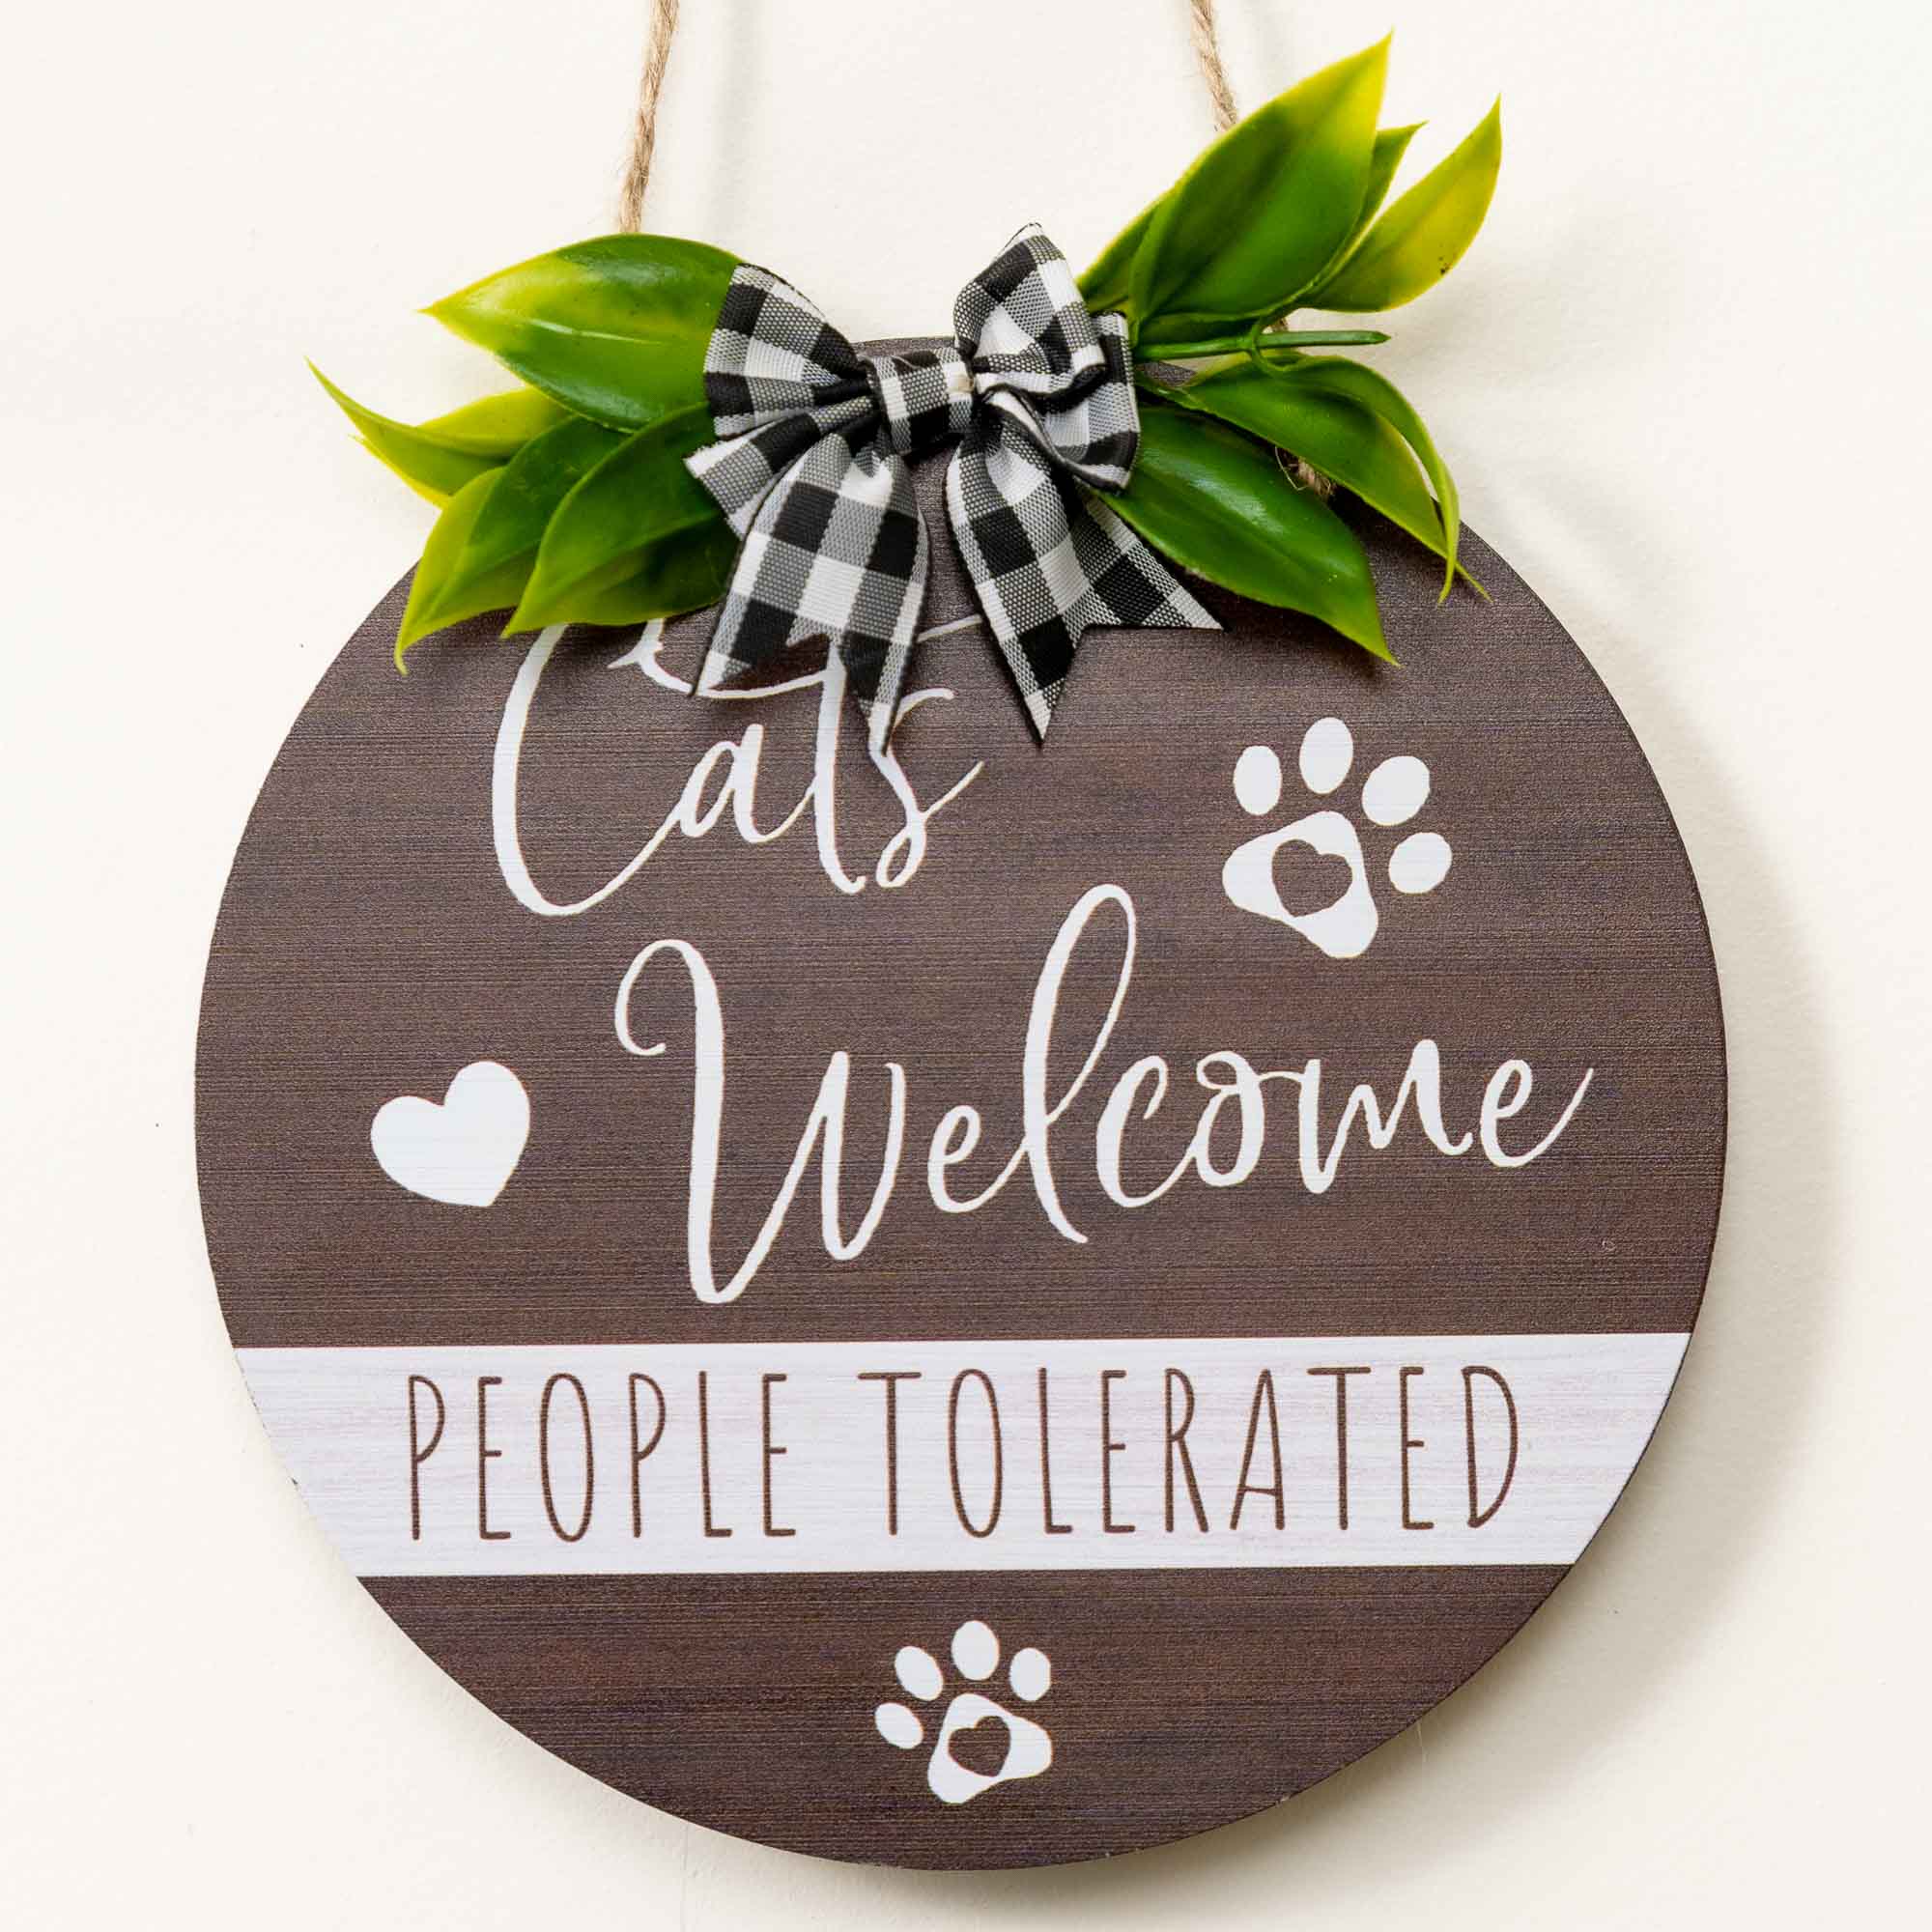 Limited Time Offer - Cats Welcome People Tolerated  - Home Decor Hanging Sign for Cat Lovers !